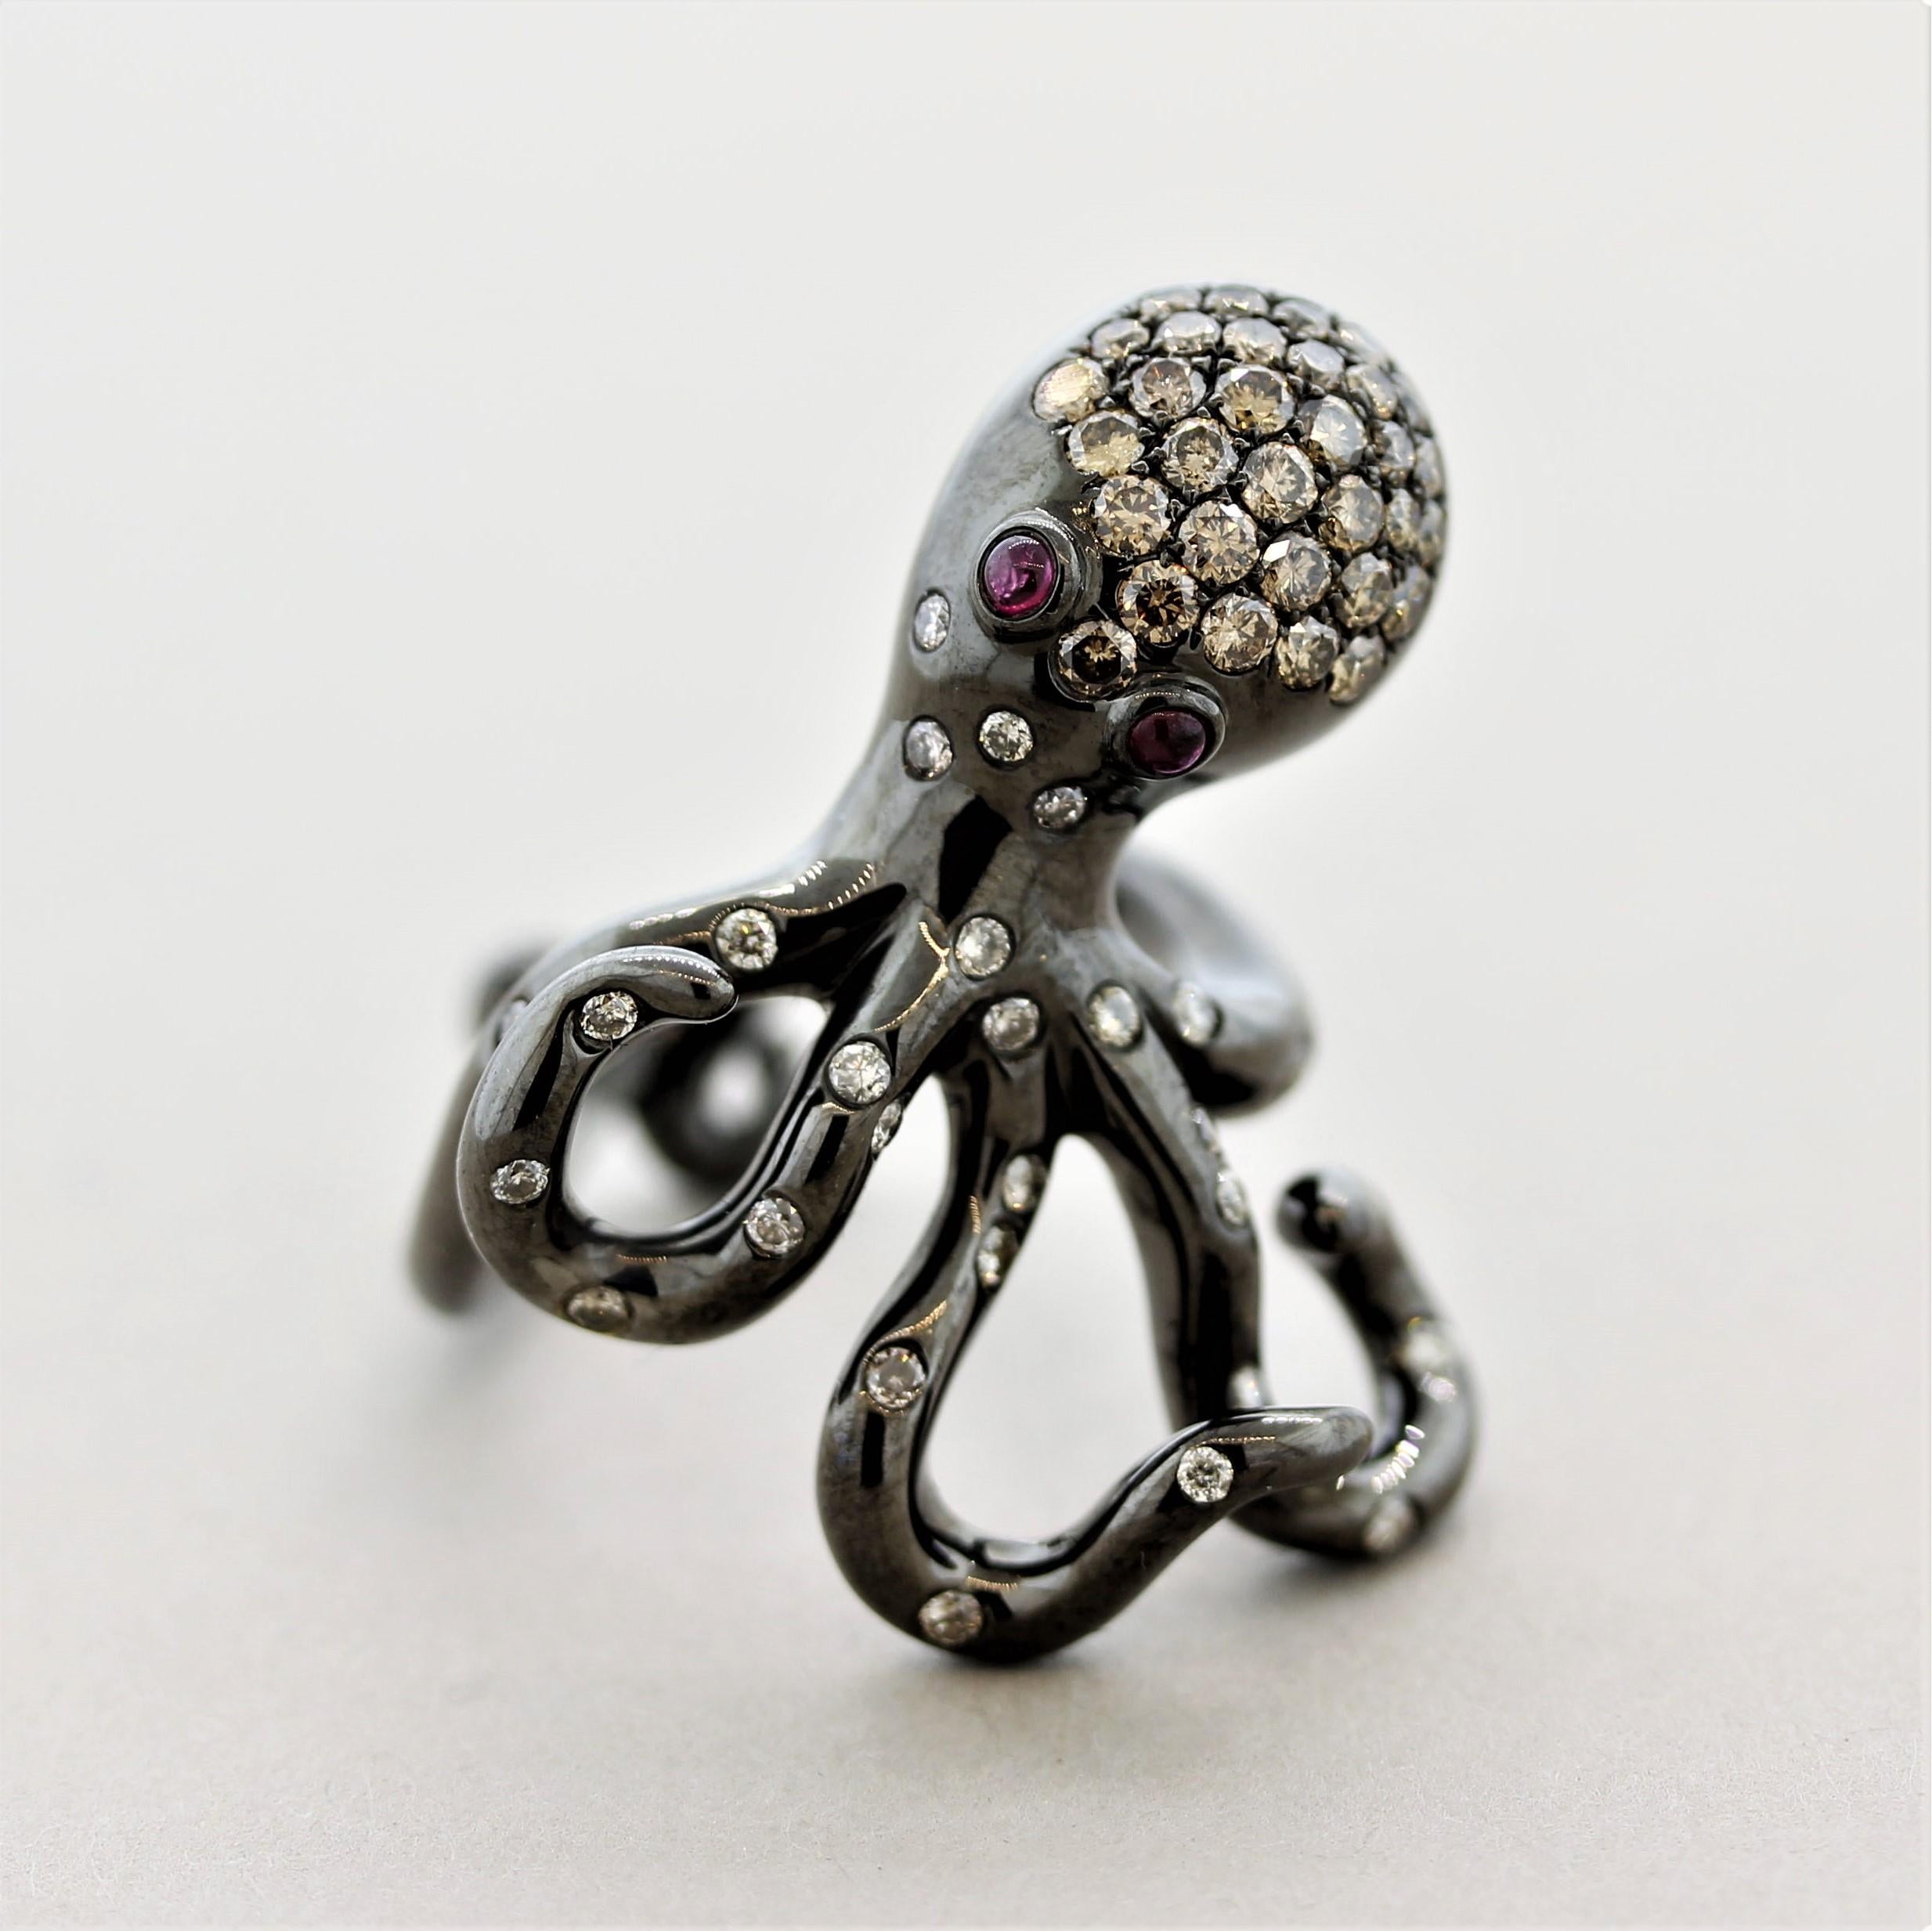 Masterfully crafted in a fun and whimsical style, this octopus ring is something else! It features 1.12 carats of round brilliant-cut diamonds set on the octopus’s head and tentacles. Two rubies are used for its eyes to give it a dazzling gaze. The